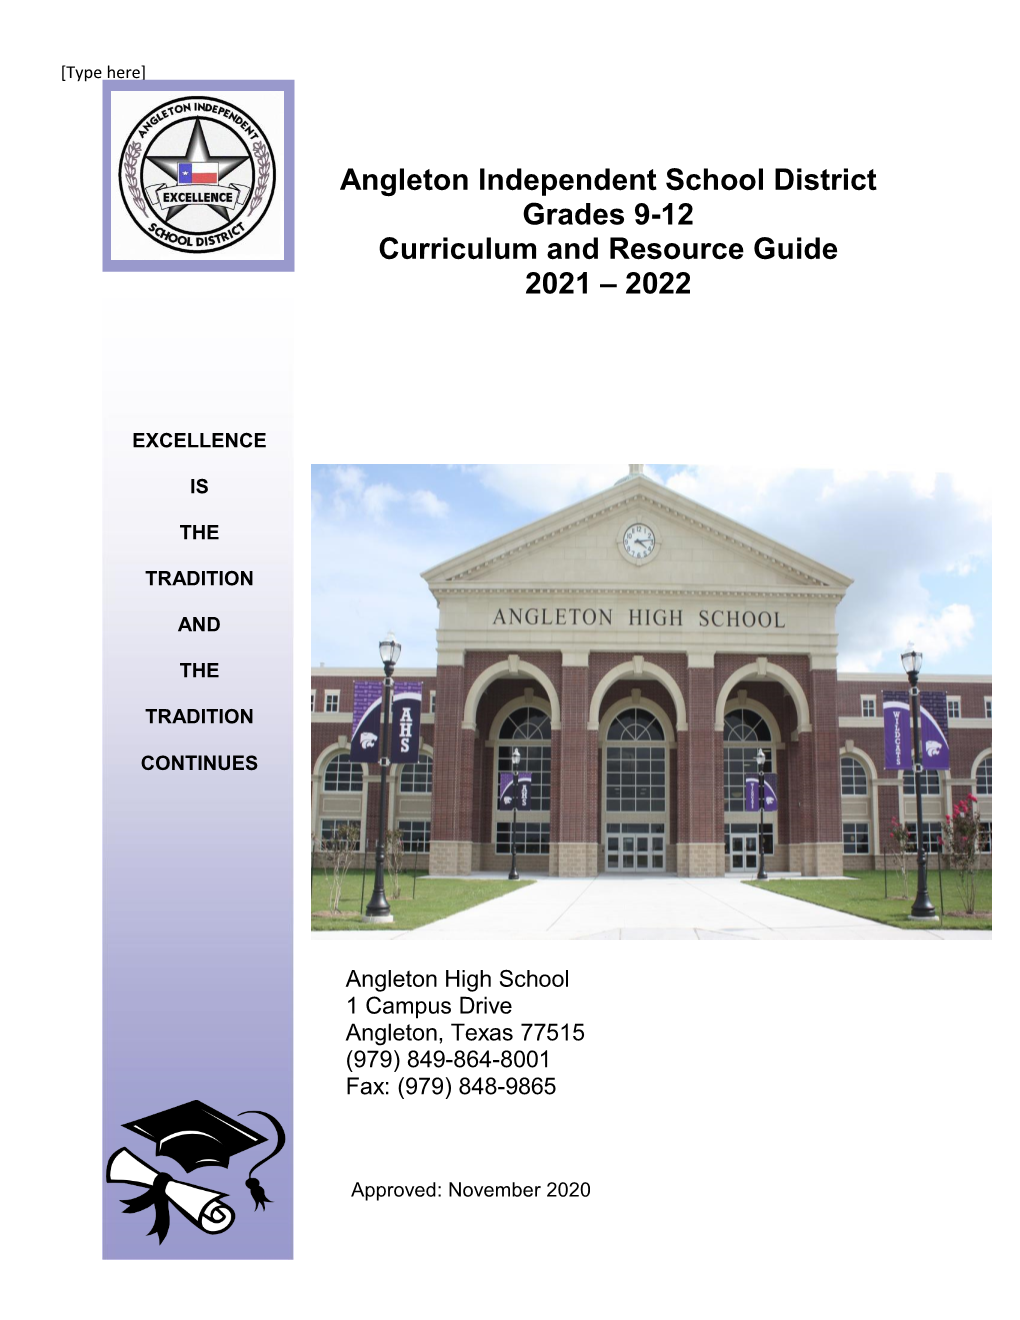 Angleton Independent School District Grades 9-12 Curriculum and Resource Guide 2021 – 2022